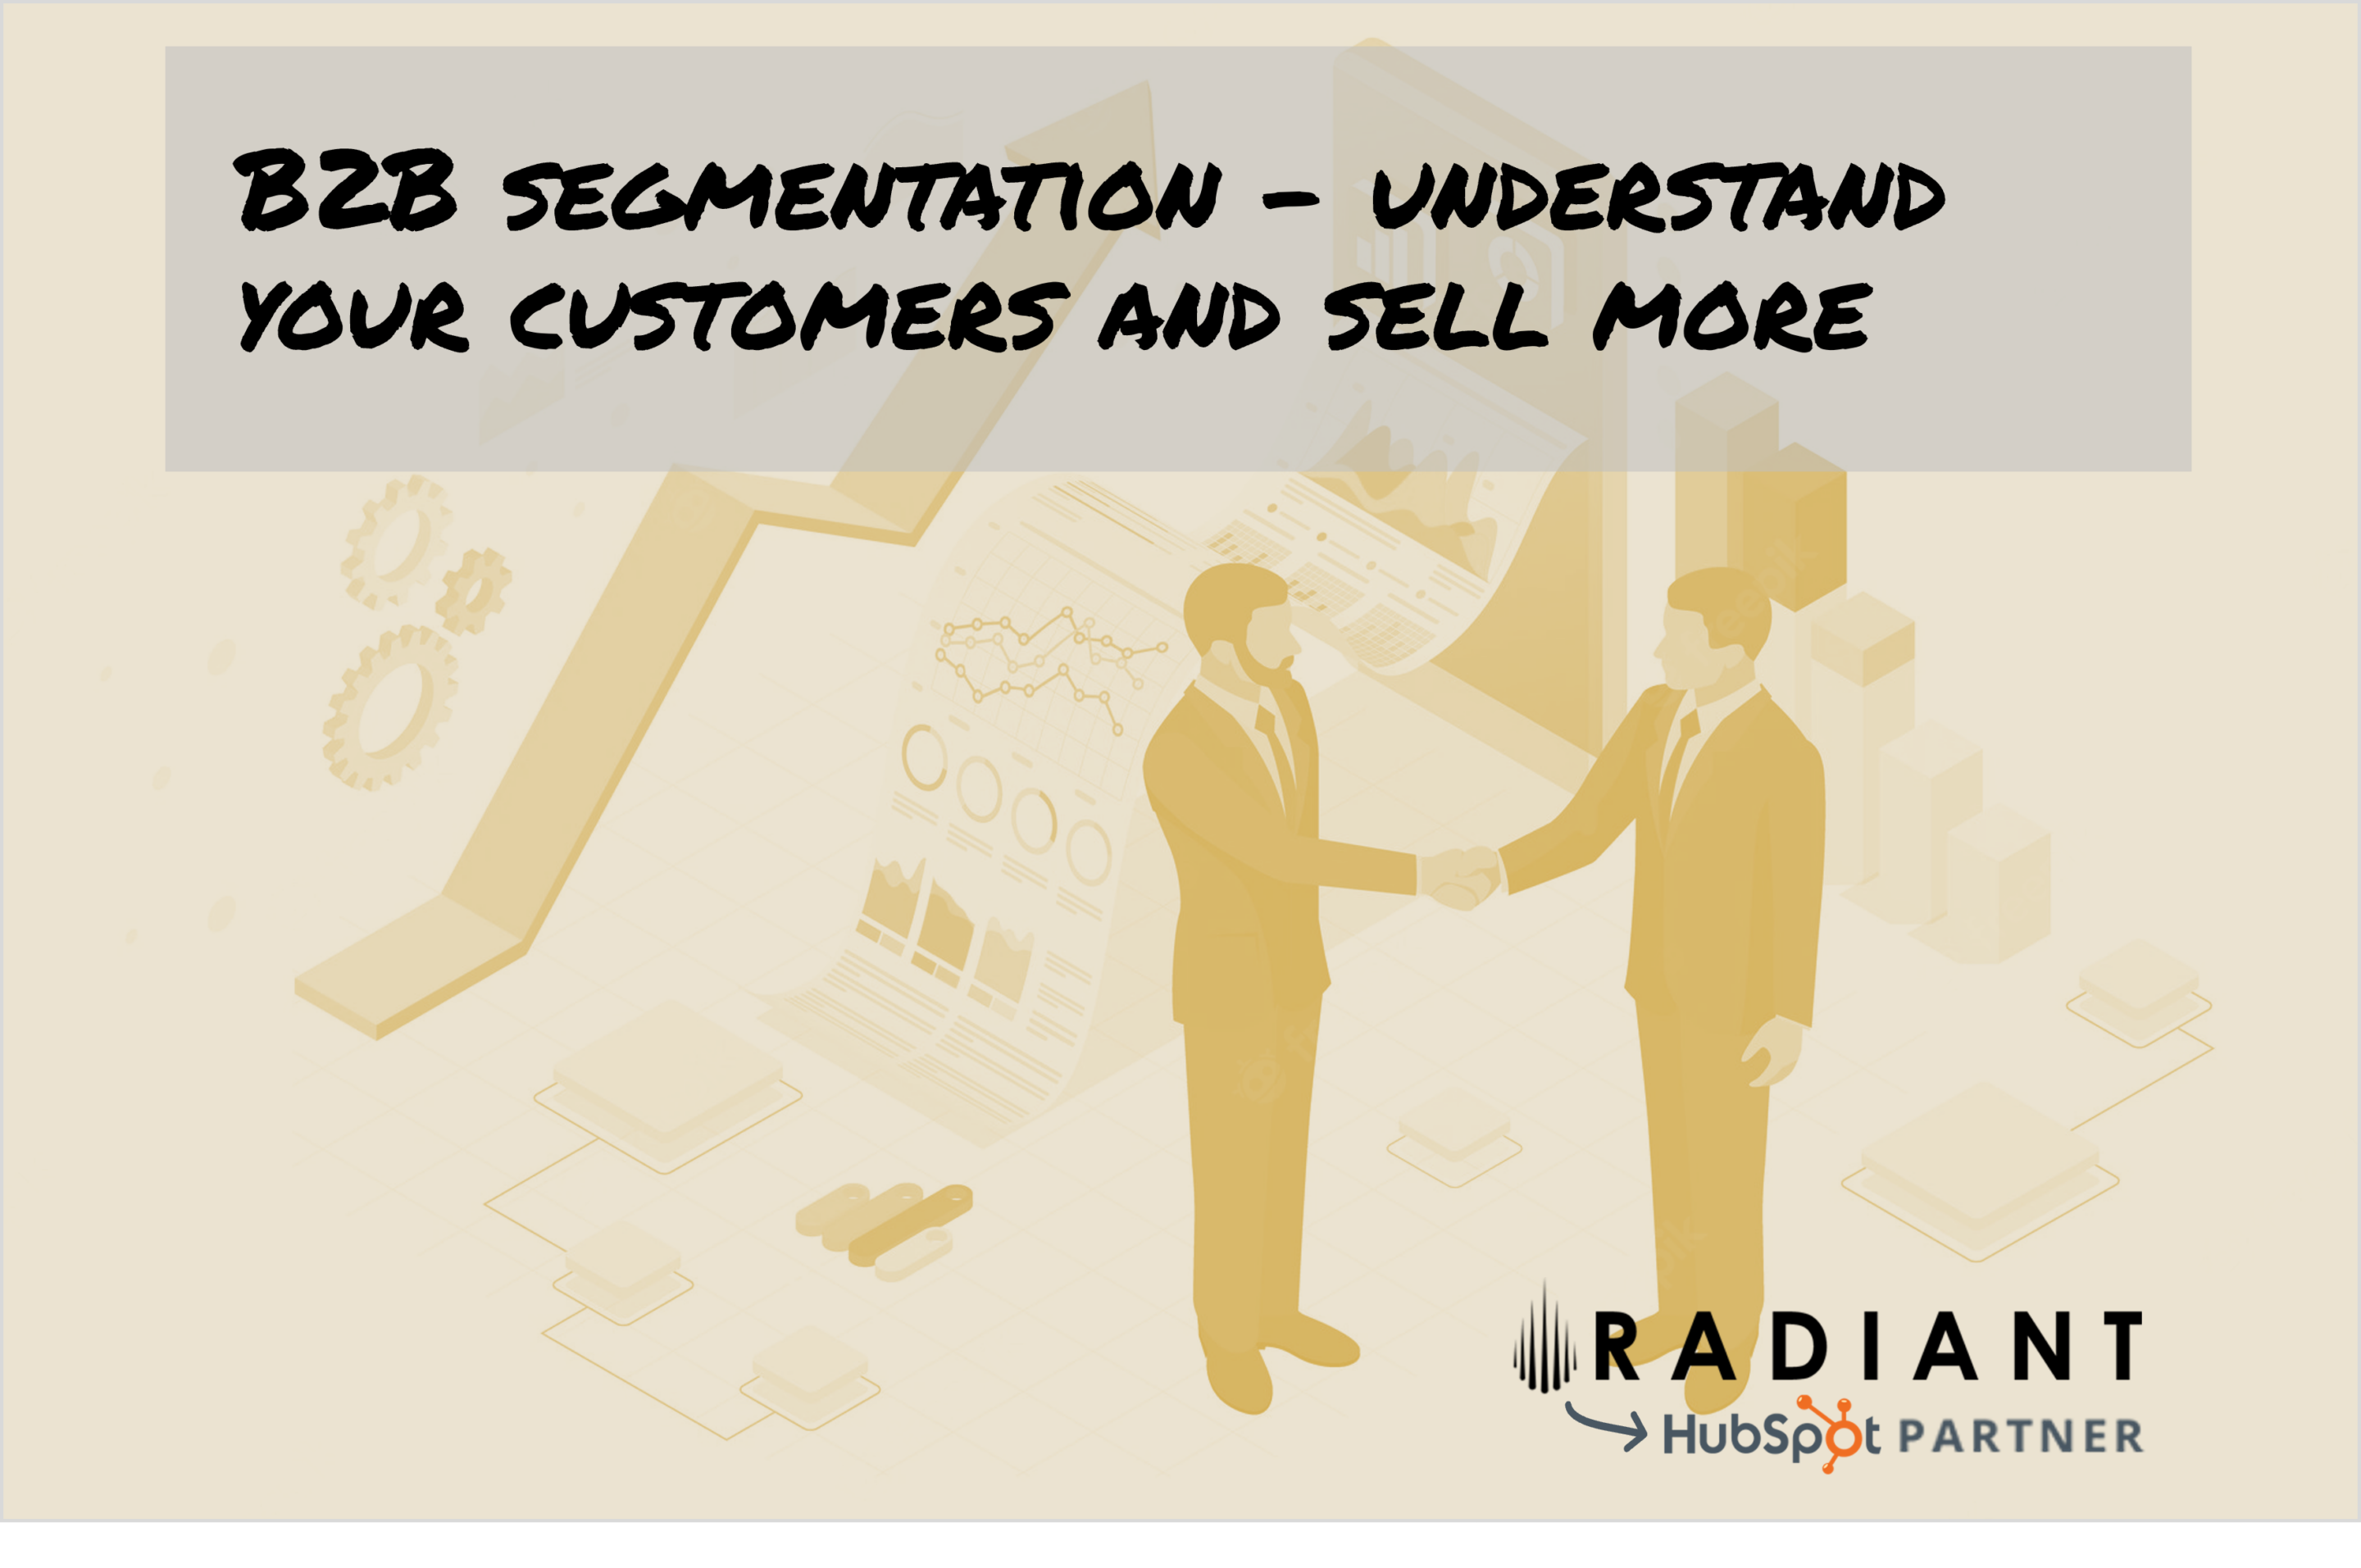 B2B segmentation – understand your customers and sell more. Segmentation enables you to prioritize customers in a more effective way.